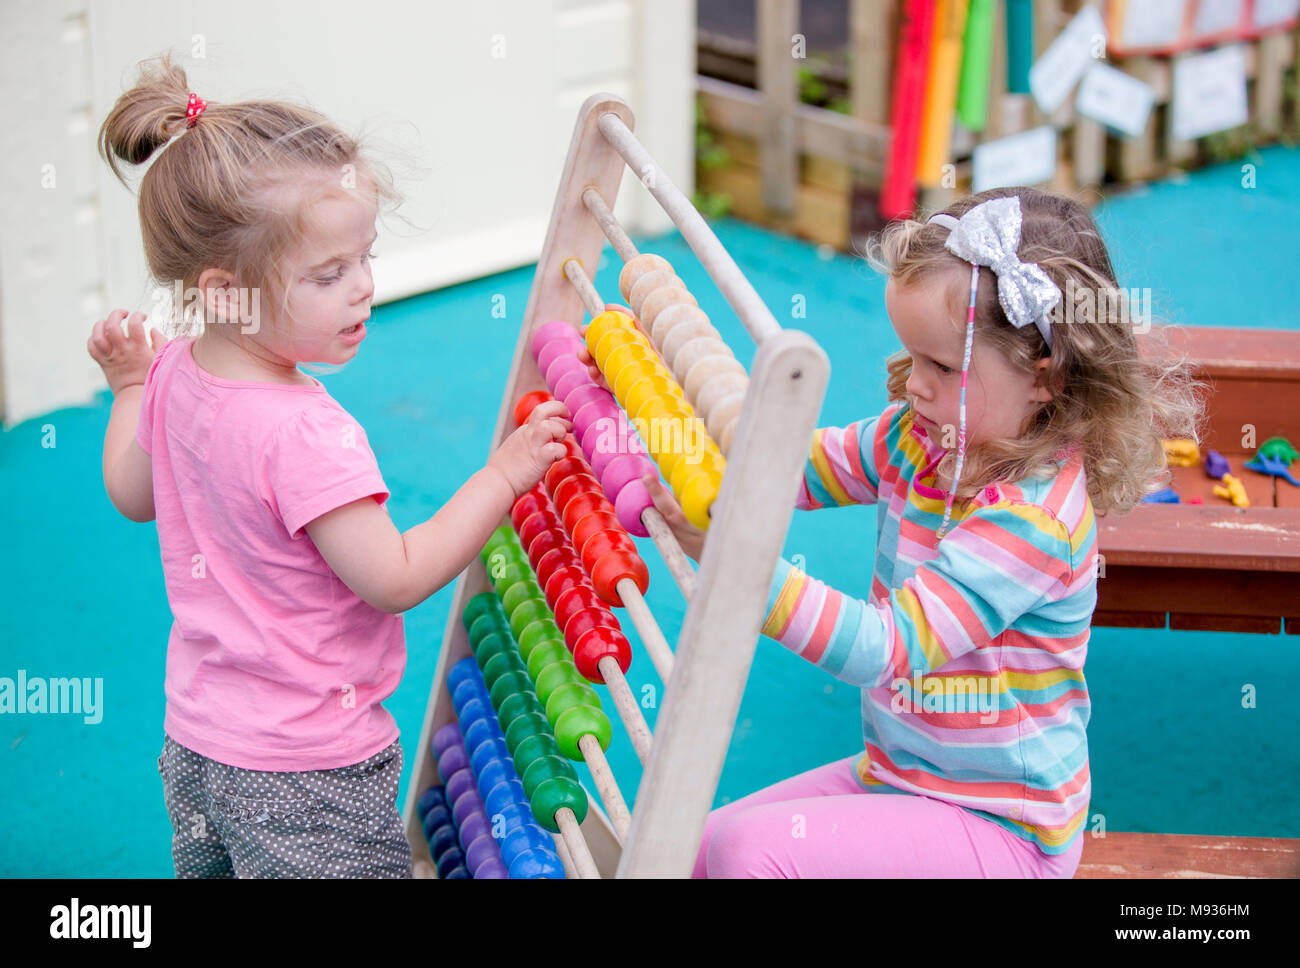 Two girls playing with an abacus at a nursery school in Warwickshire, UK Stock Photo